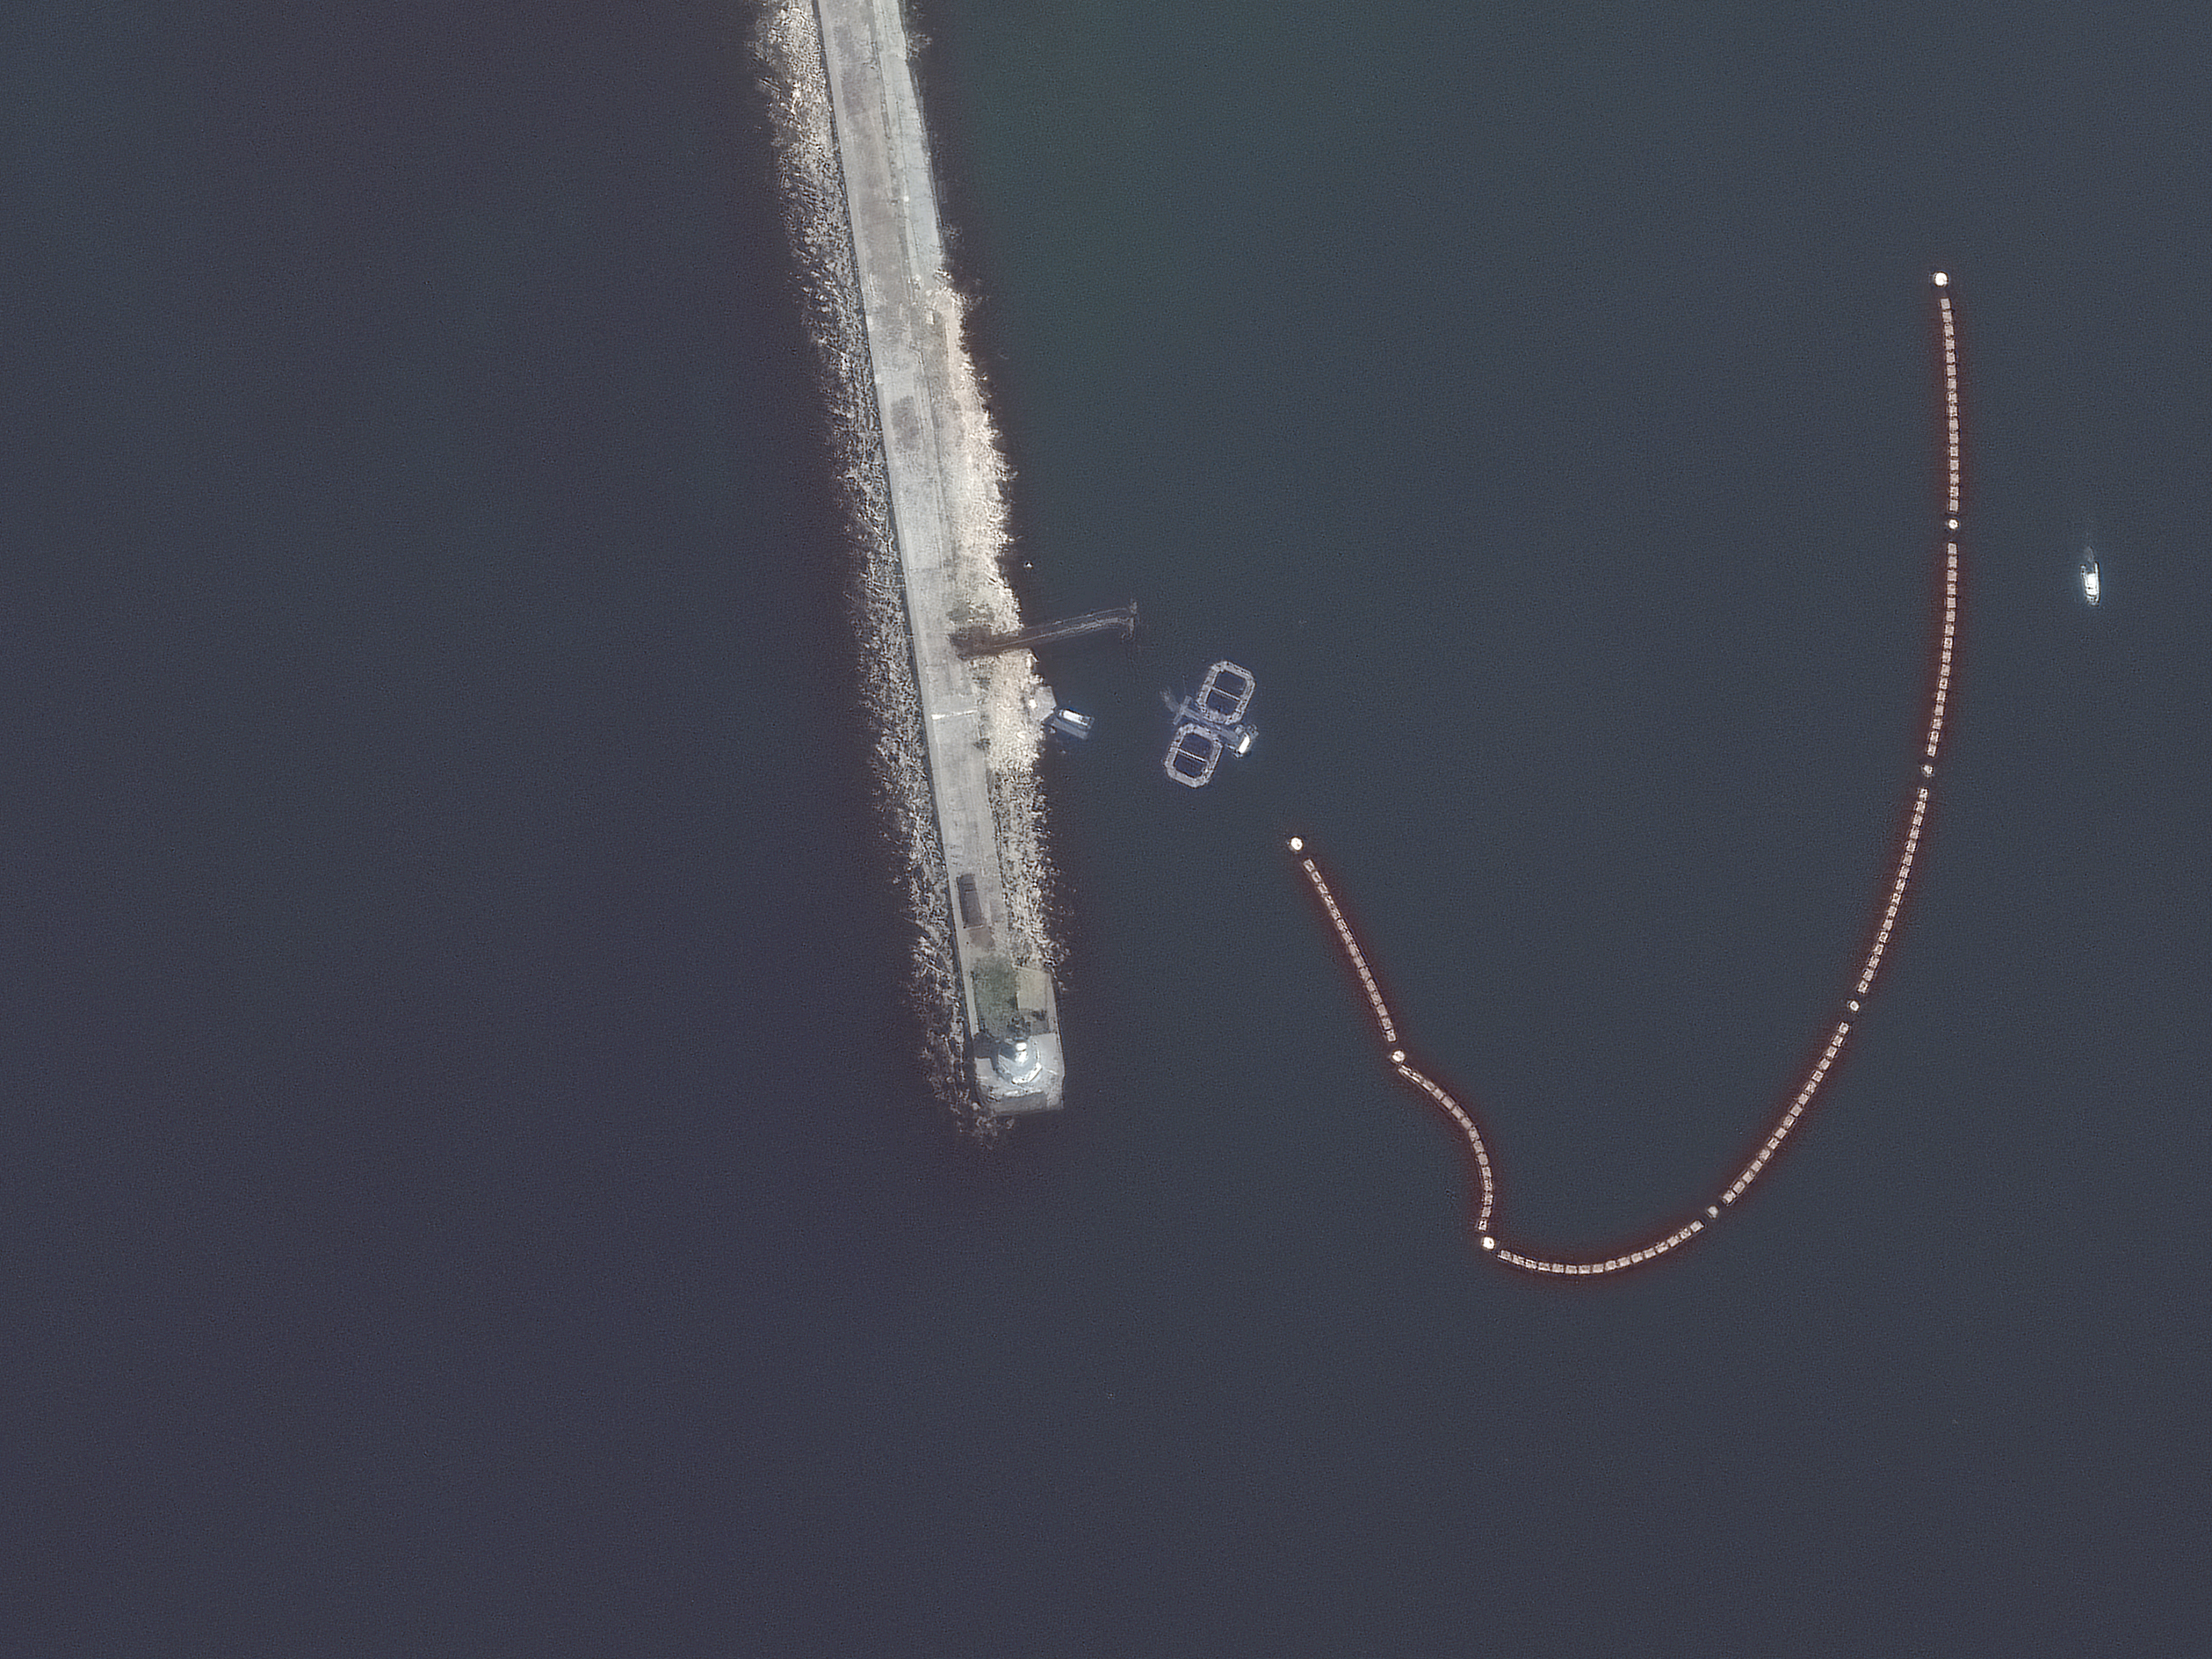 Satellite imagery captured by Maxar Technologies on Friday appears to show dolphin pens at the entrance to Sevastopol Harbor. The naval base there is important to the Russian military because of its proximity to the Crimean peninsula.